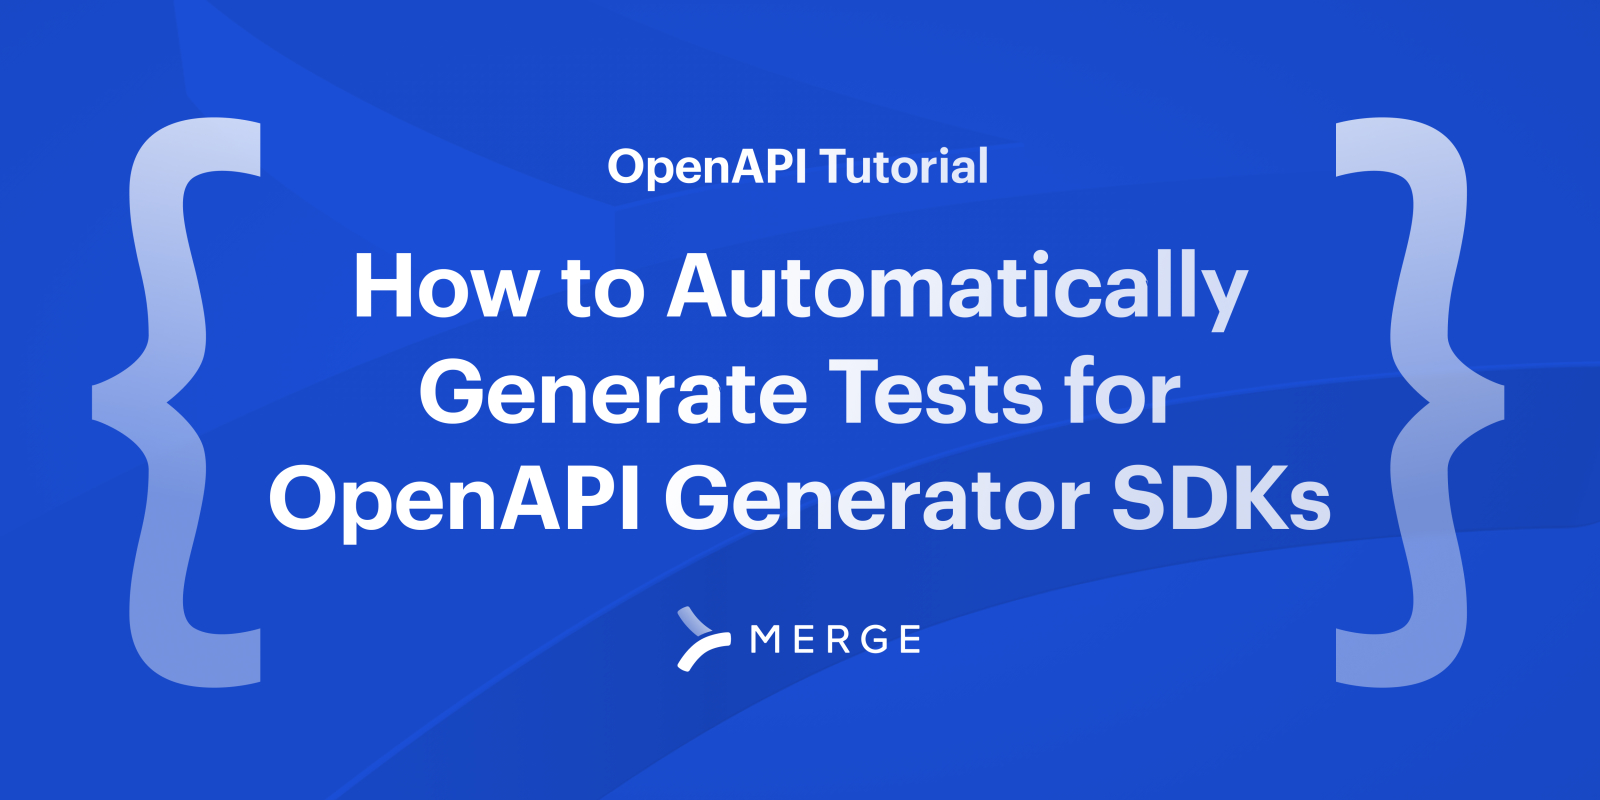 OpenAPI Tutorial: How to Automatically Generate Tests for OpenAPI Generator SDKs